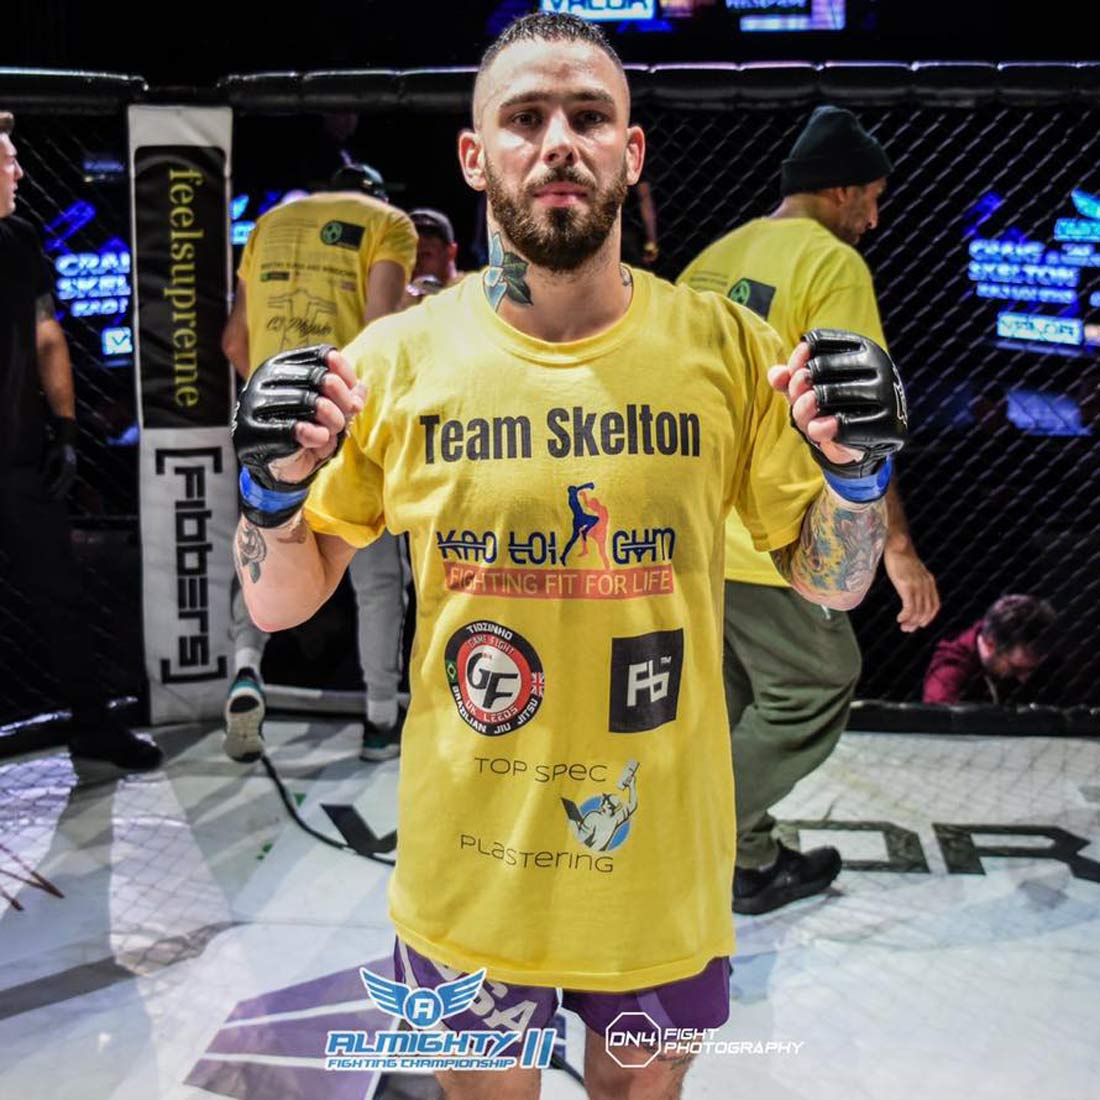 Professional MMA fighter Craig Skelton made a victorious return to the cage at the Almighty Fighting Championships at the O2 Academy in Leeds